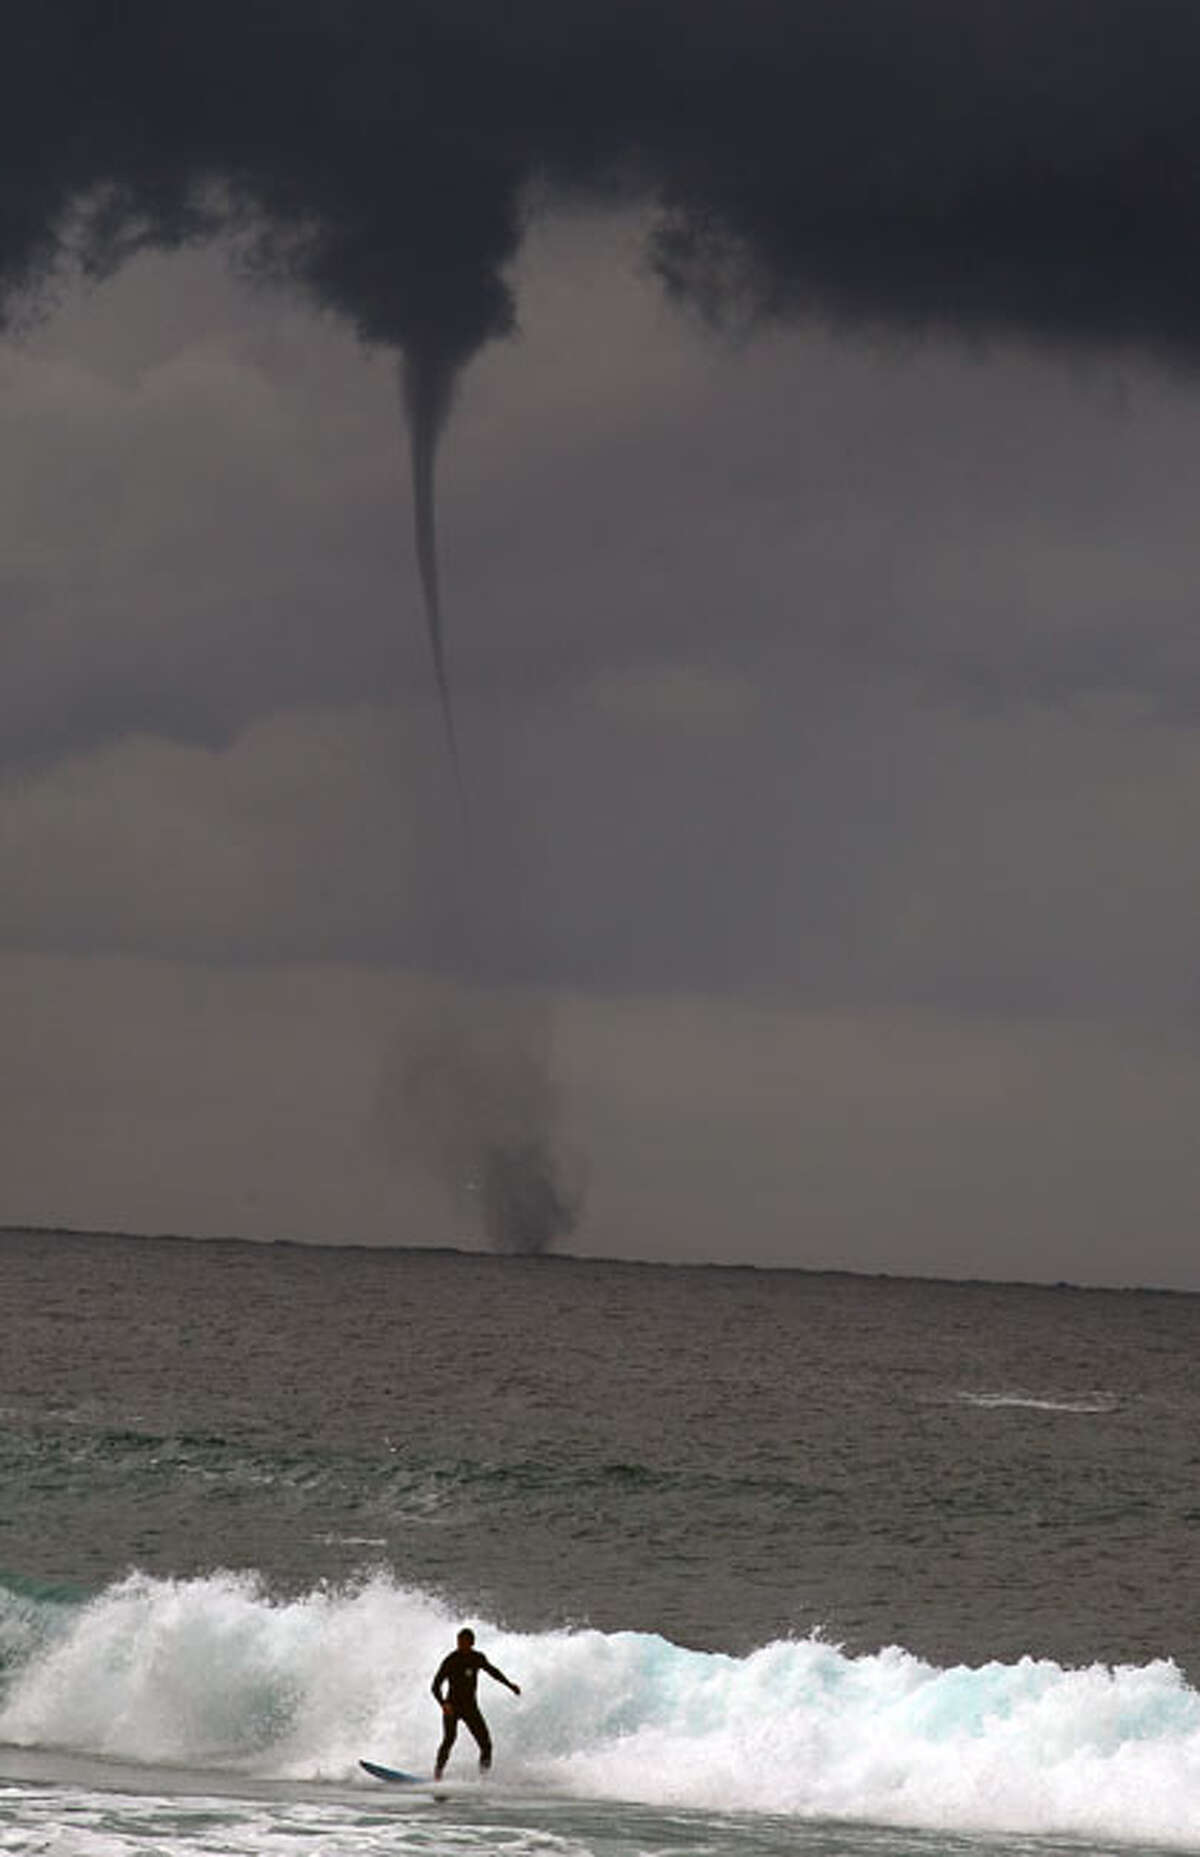 A water spout (tornado) hits the sea behind a surfer on Sydney's Bondi Beach on May 17, 2010. A rare sight in Australia, the water spout lasted around five minutes and expired before landfall.